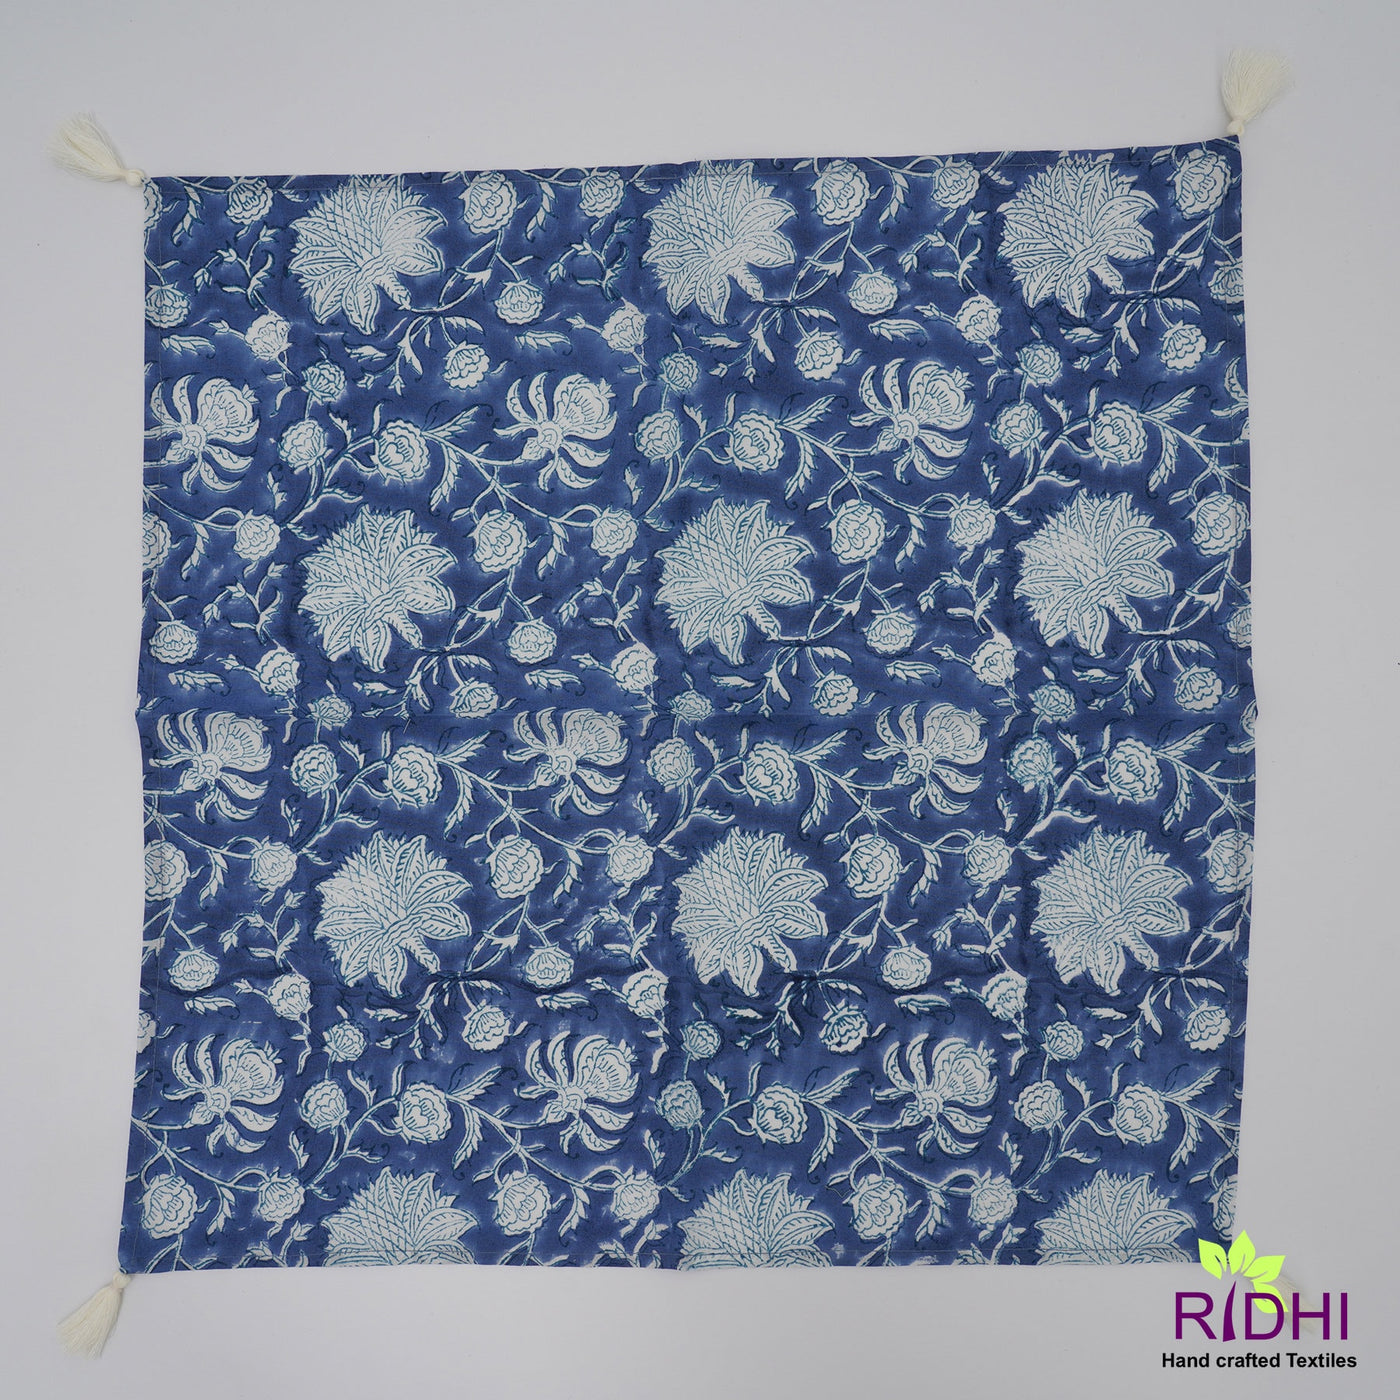 Prussian Blue and Off White Indian Hand Block Floral Printed Cotton Cloth Napkins Wedding Event Party Home Gift 9x9"- Cocktail 2020"- Dinner